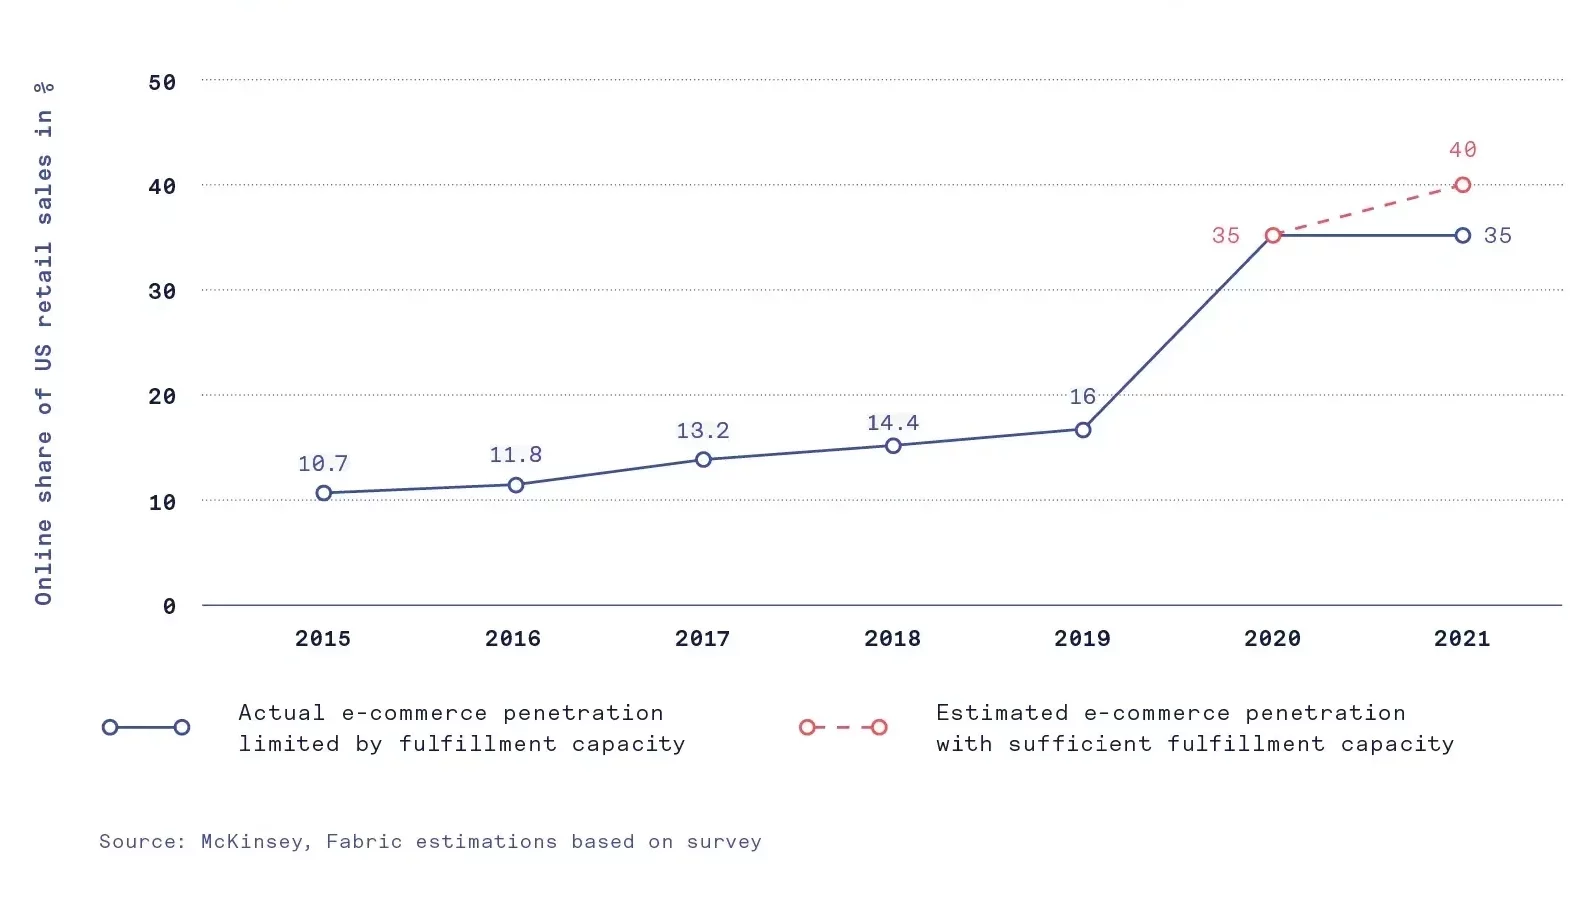 Estimated e-commerce penetration with sufficient fulfillment capacity